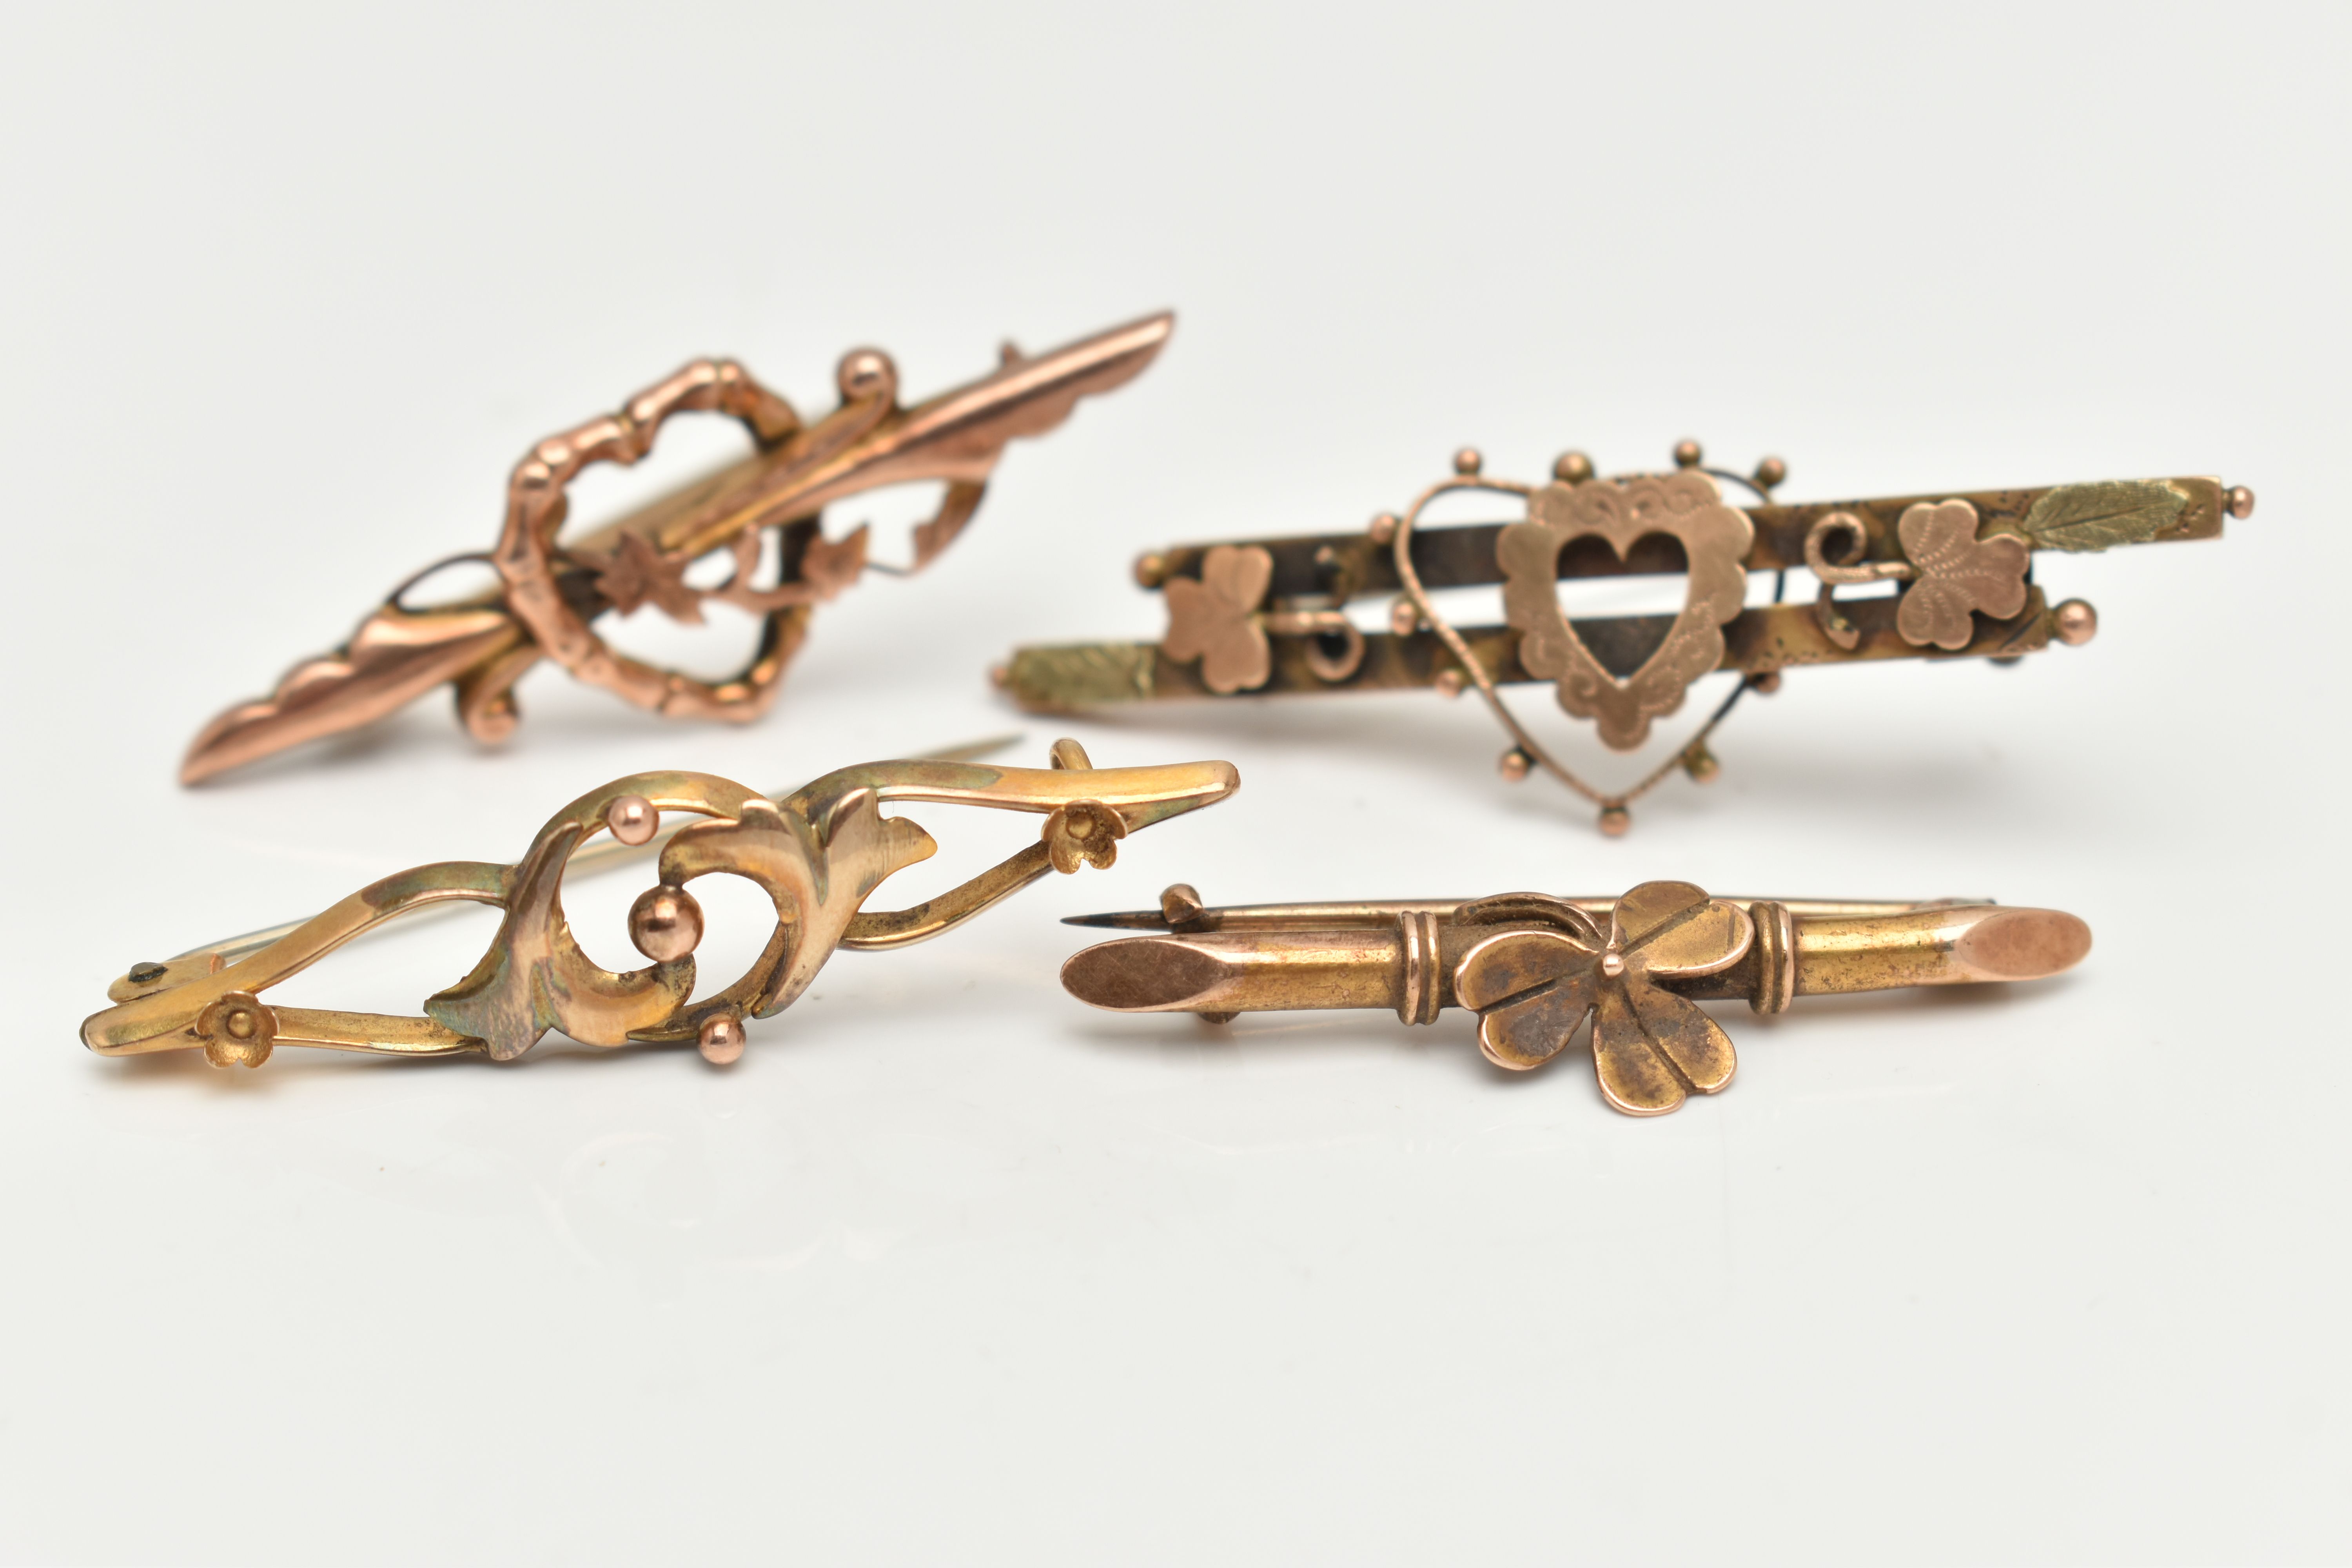 FOUR EARLY 20TH CENTURY BAR BROOCHES, the first a 9ct gold bar brooch with open heart detail,